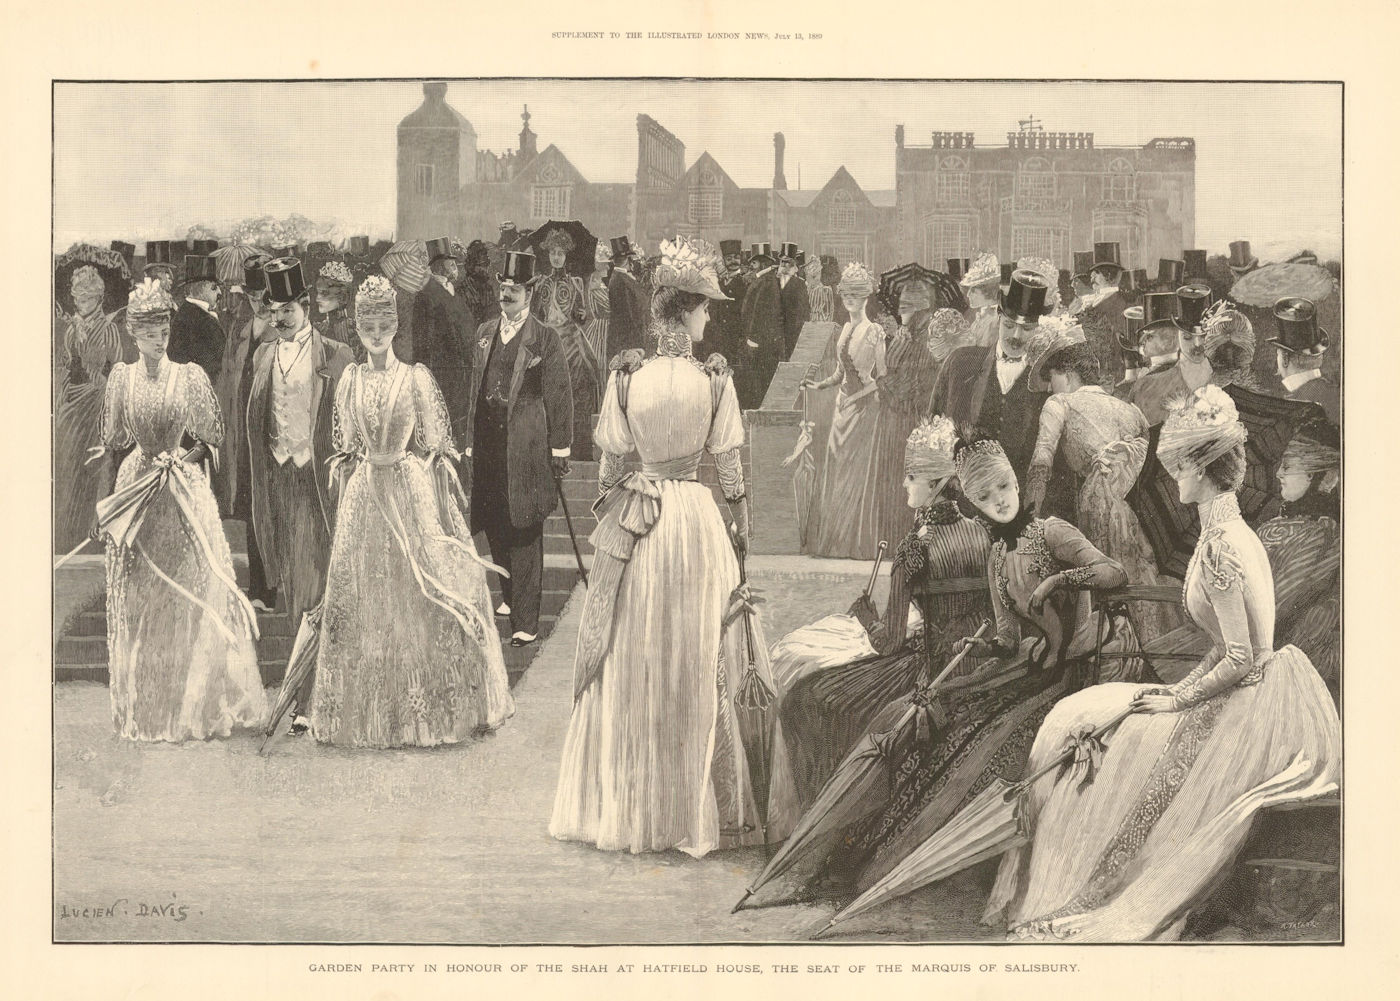 Garden party for Naser al-Din Shah Qaja of Persia (Iran) at Hatfield House 1889